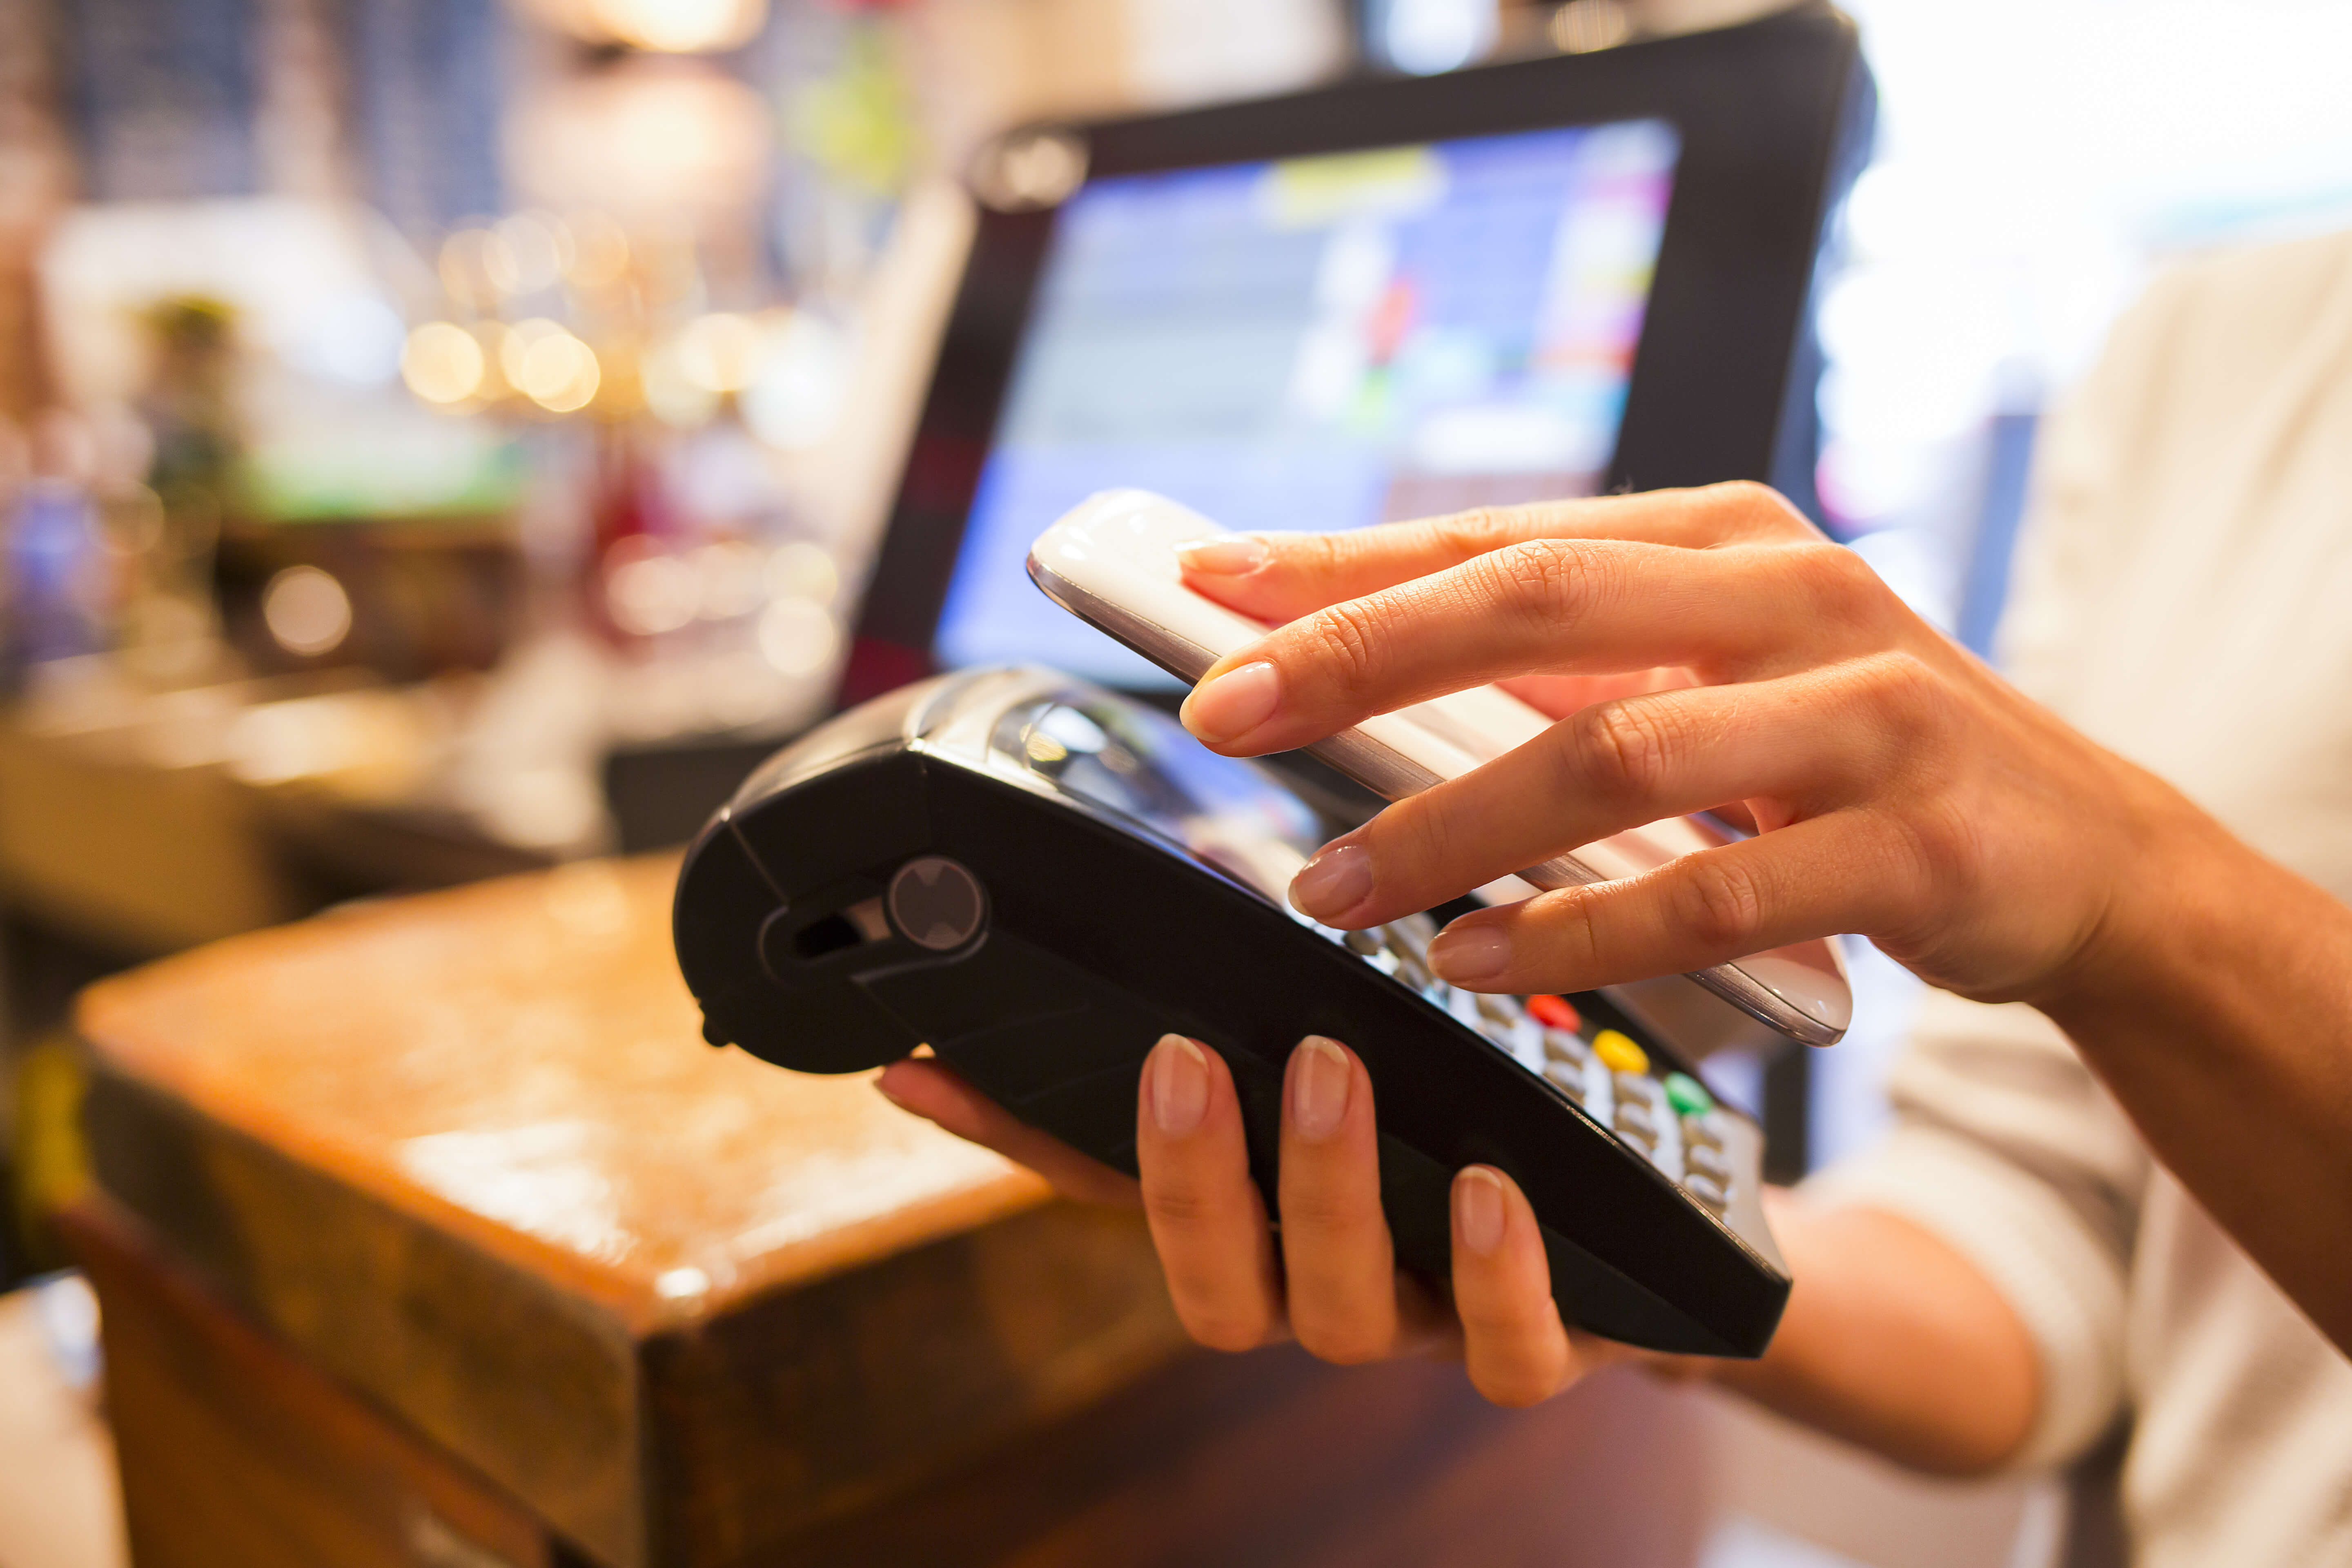 Cardless payments becoming the norm